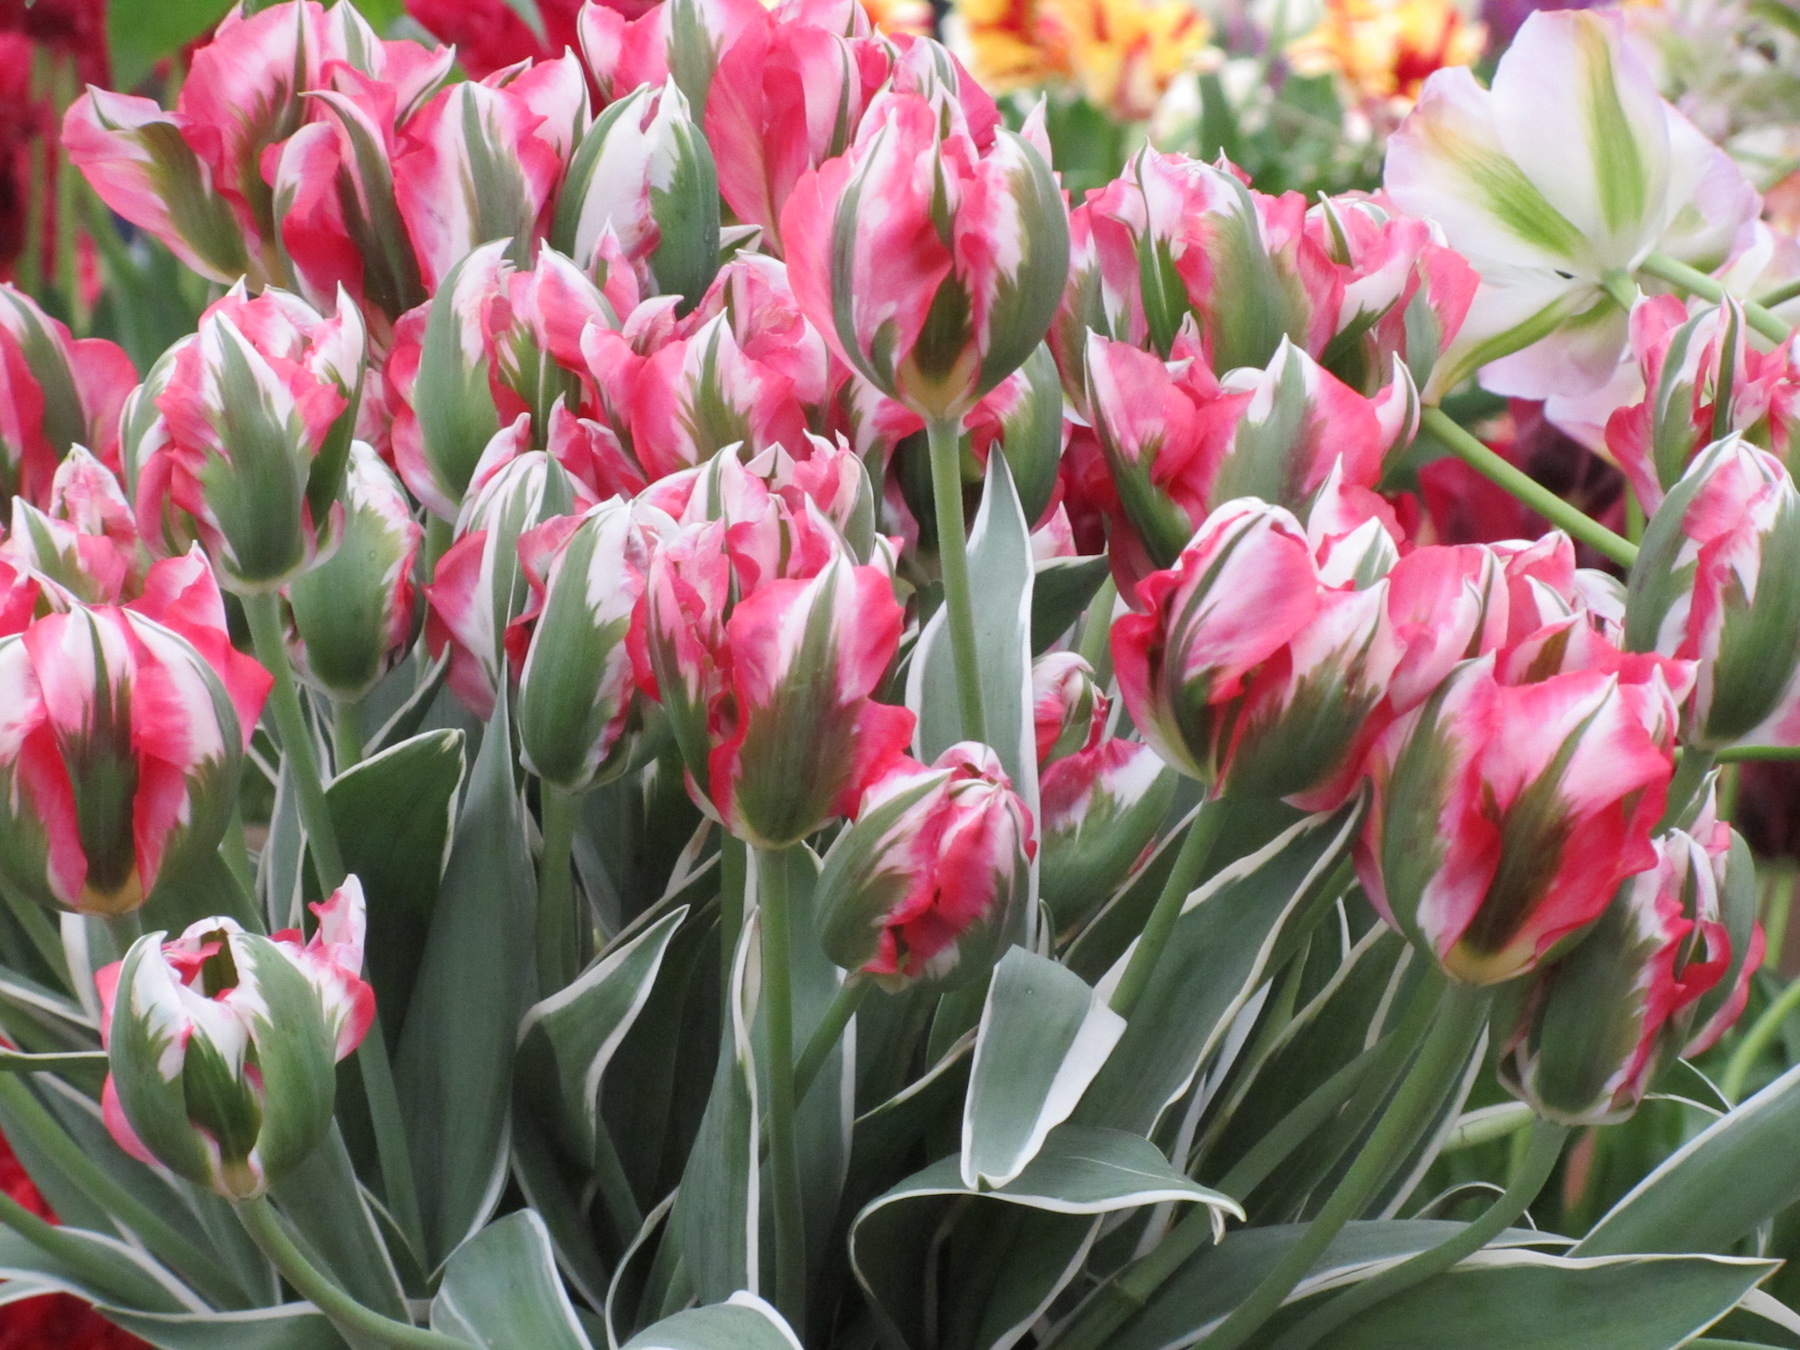 Tulips at Chelsea Flower Show